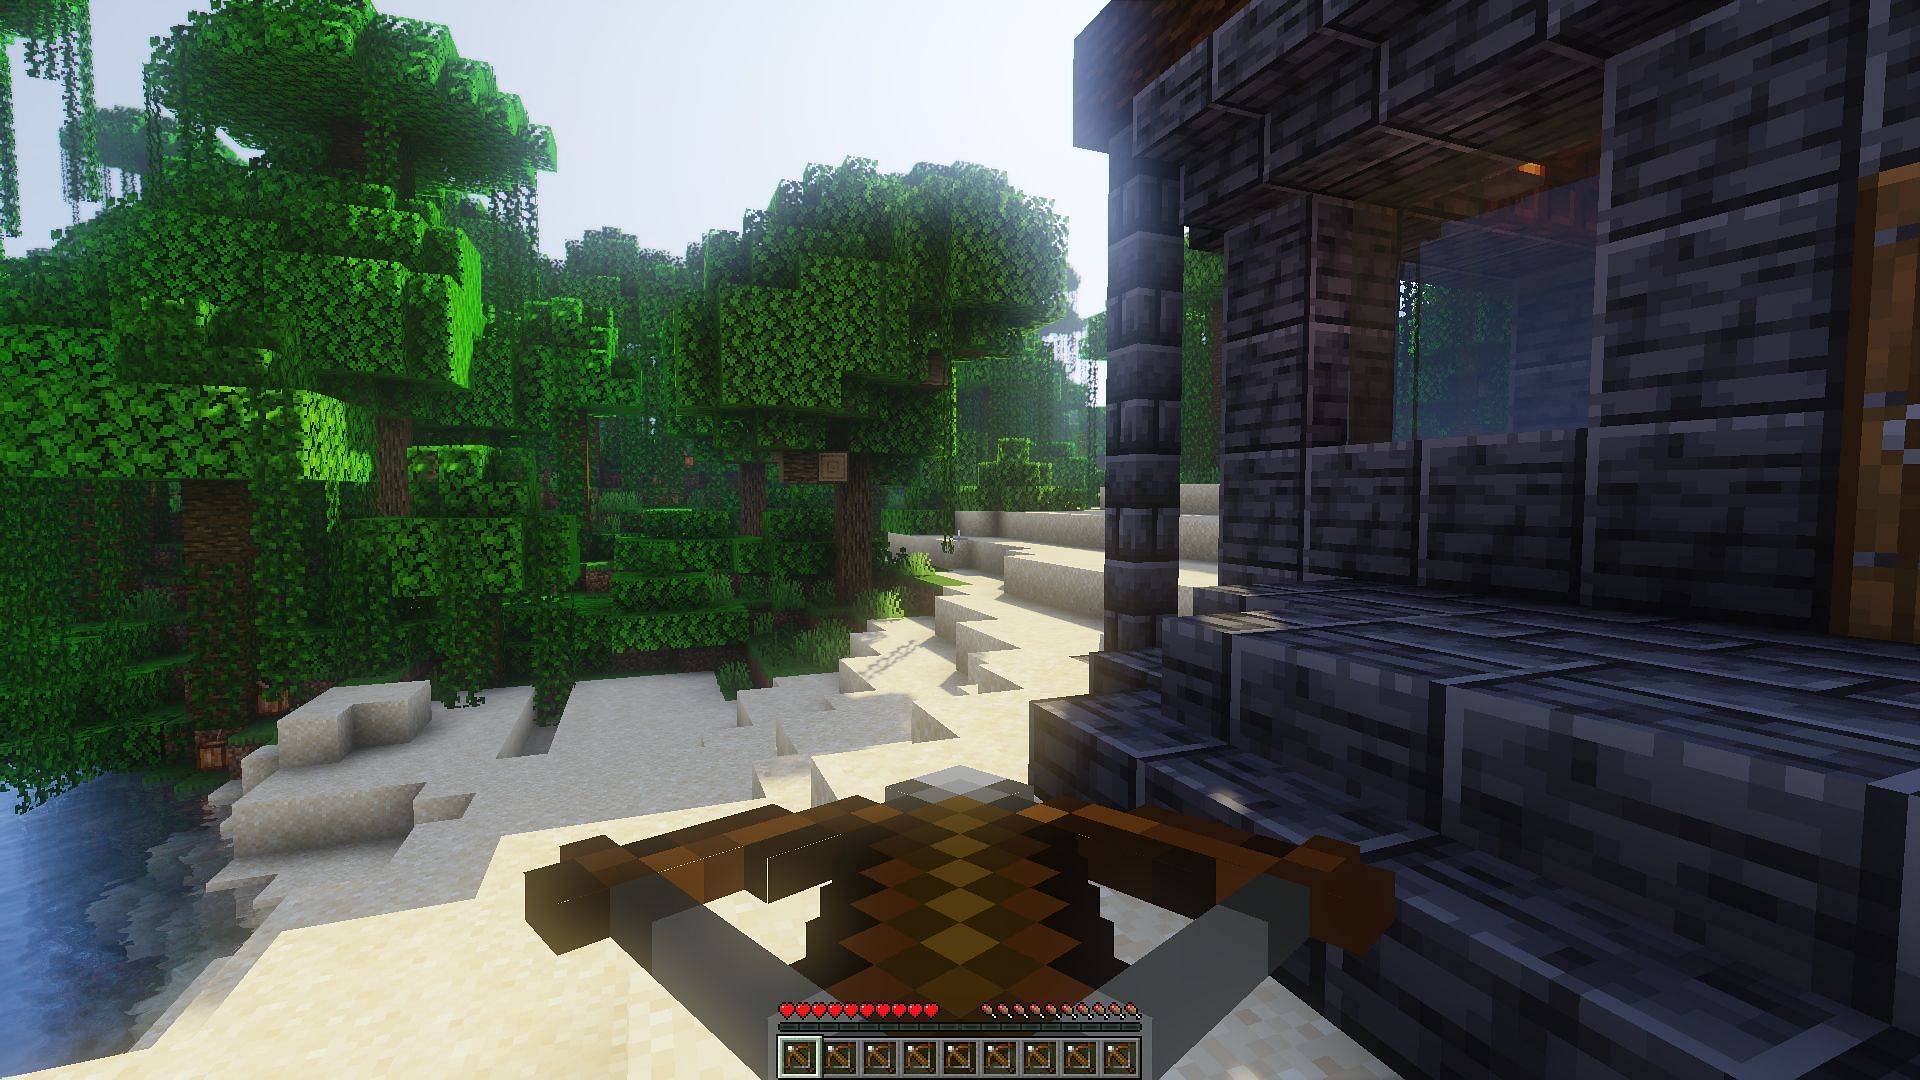 An example of a player with a hotbar full of loaded crossbows (Image via Minecraft/Mojang)